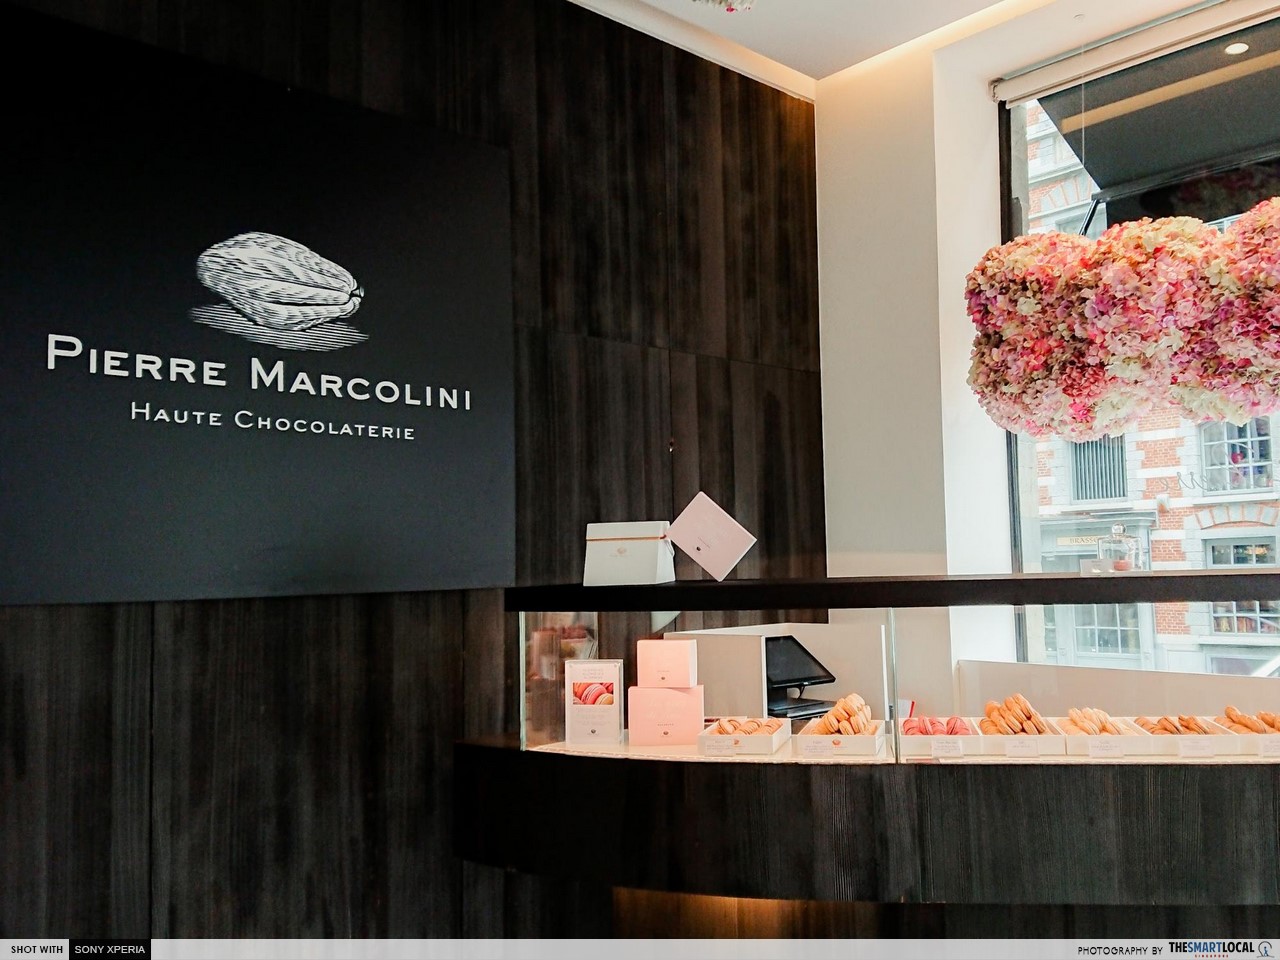 Brussels 7 things (1) - Pierre Marcolini interior